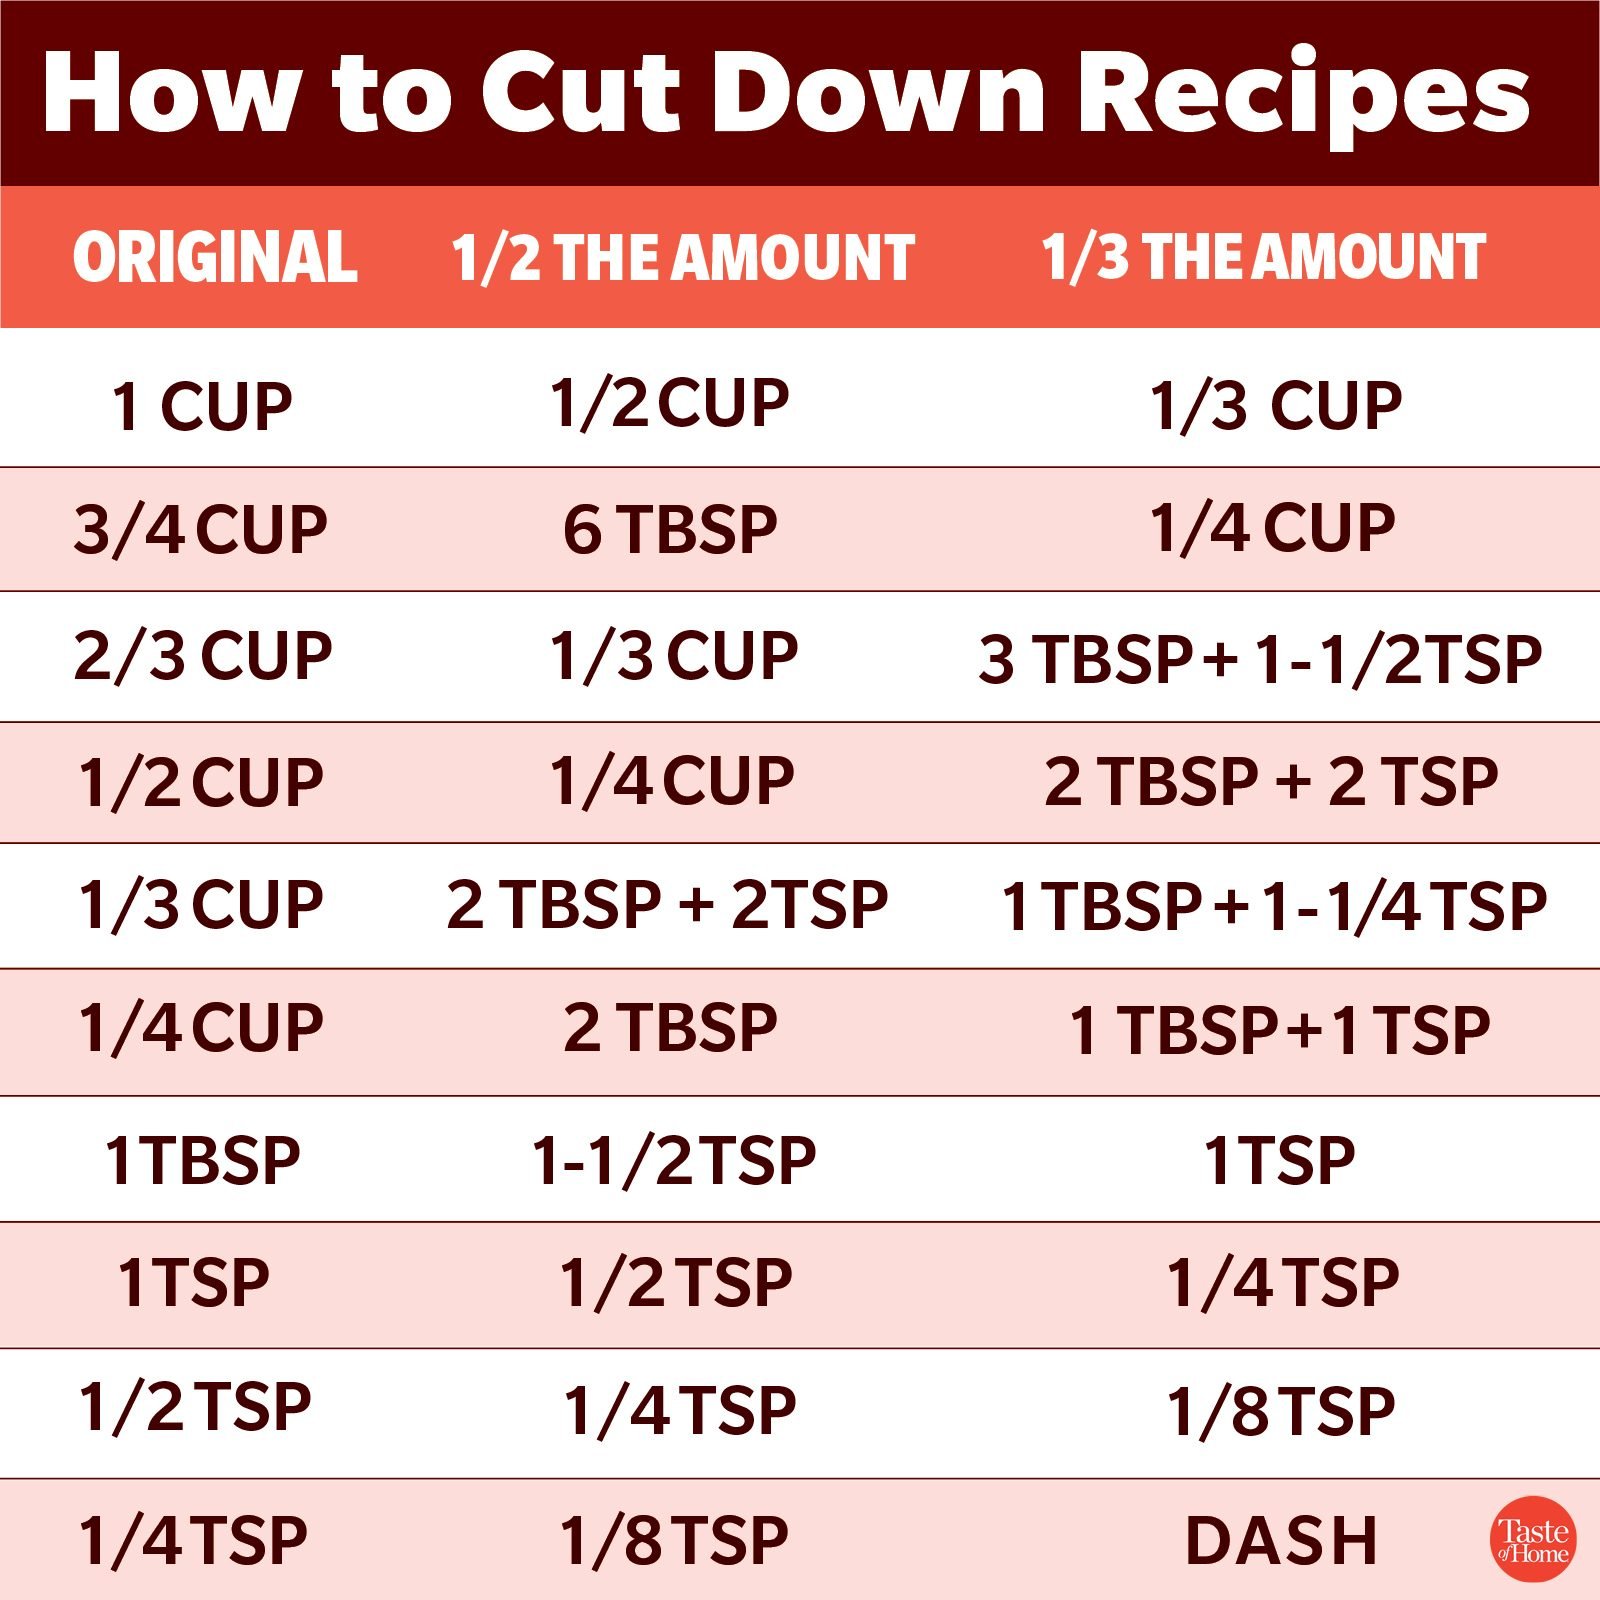 https://www.tasteofhome.com/wp-content/uploads/2020/04/Newsletters_How-to-cut-down-recipes_1200x1200.jpg